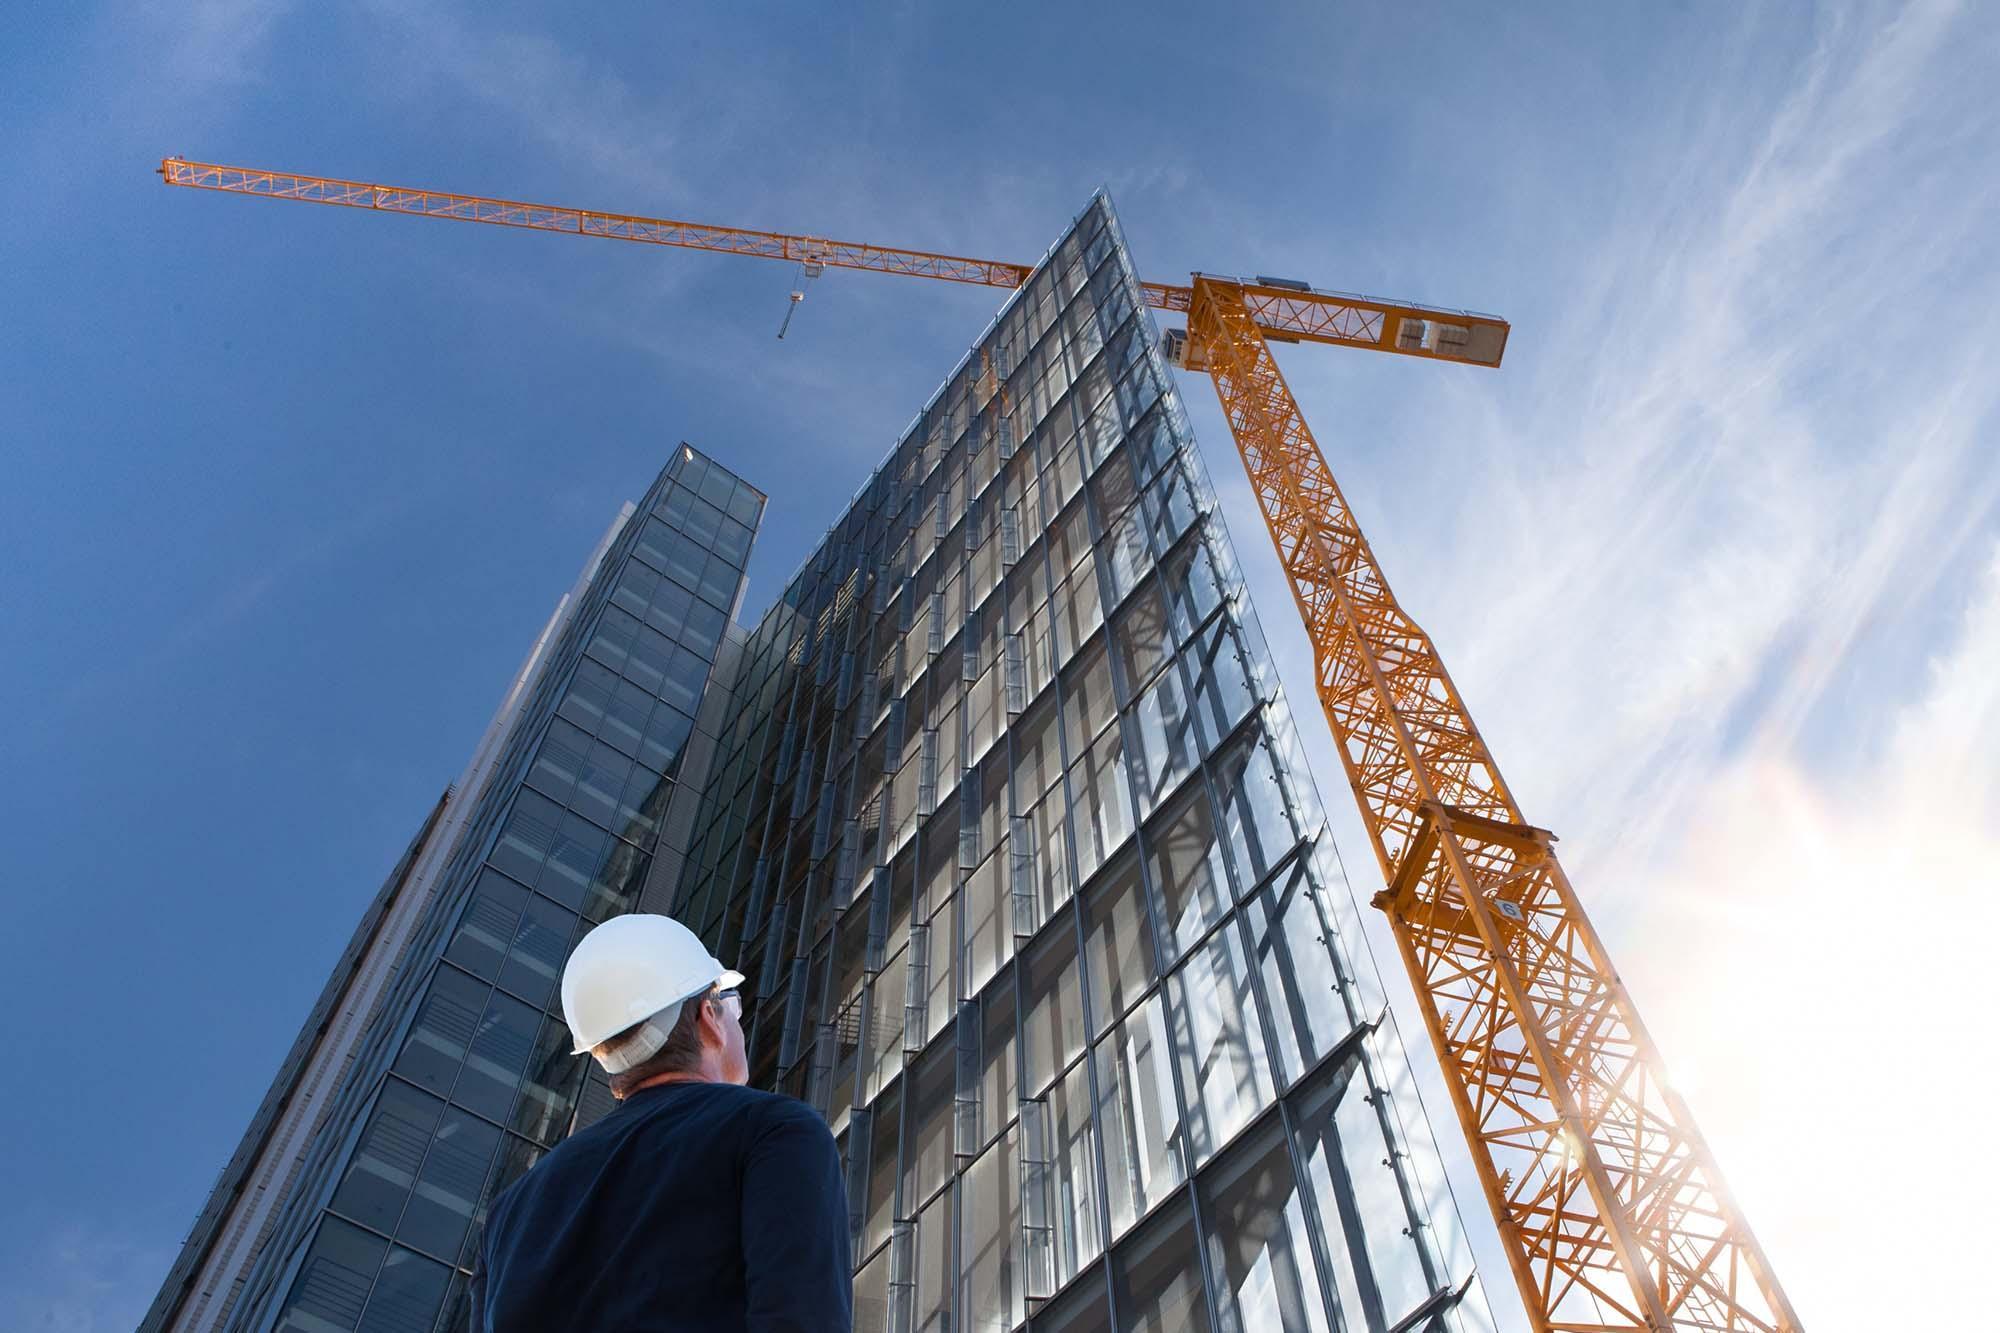 Above all, supervision means managing the risks inherent to construction activities.